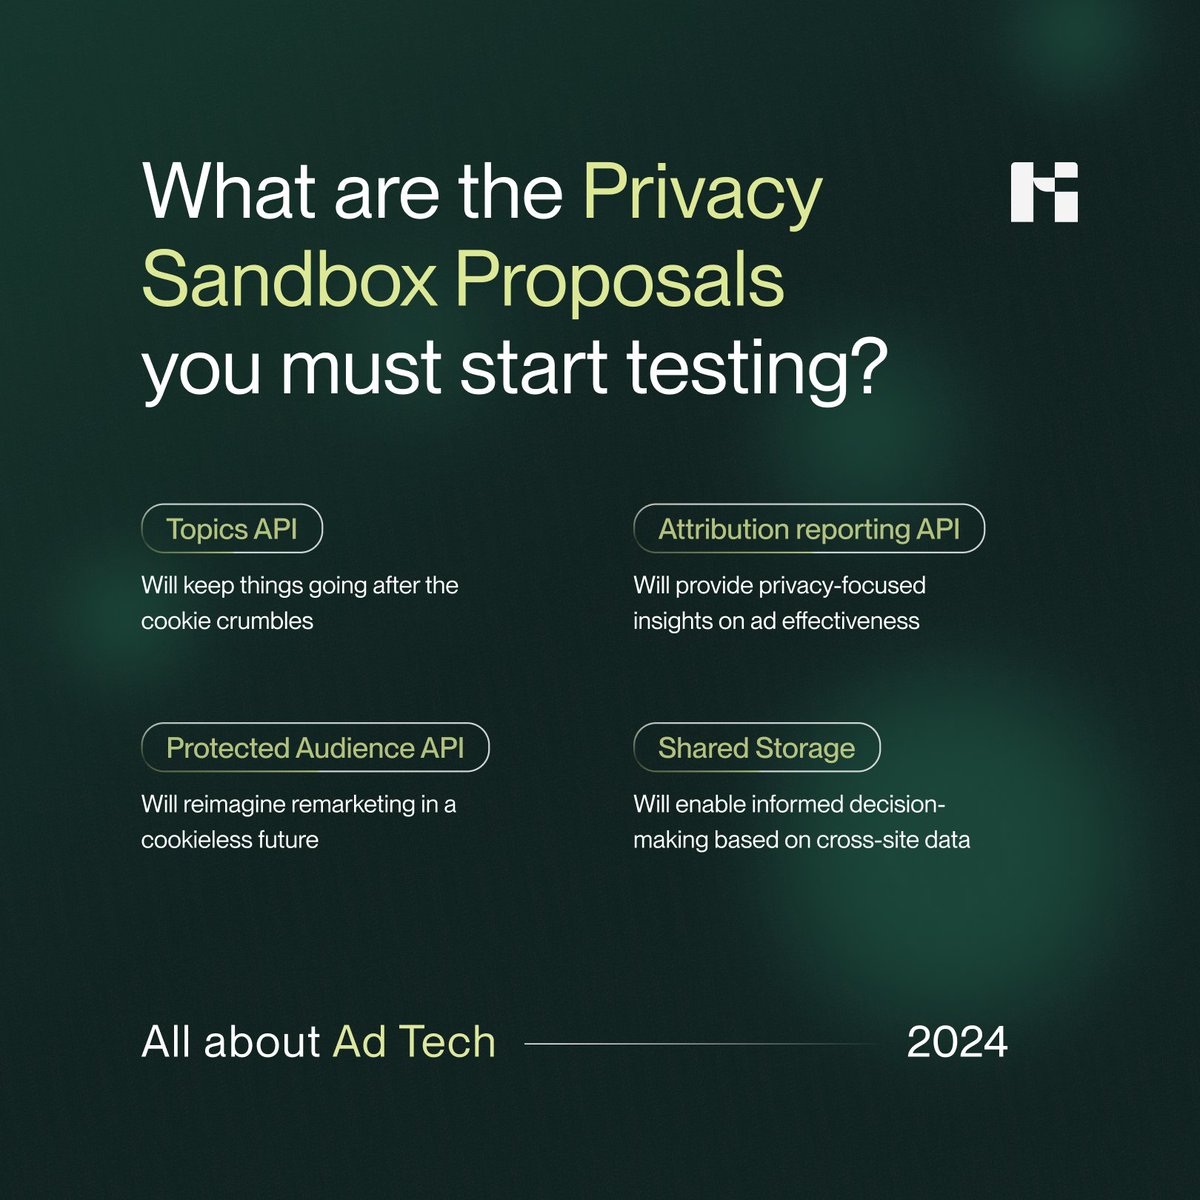 #Google may have been teasing the launch of the #PrivacySandbox for a few years now, but it is finally here.

There are 30+ proposals, each strengthening various aspects of the privacy-first future. Publishers must start testing them actively.

Head to the comments to learn more.